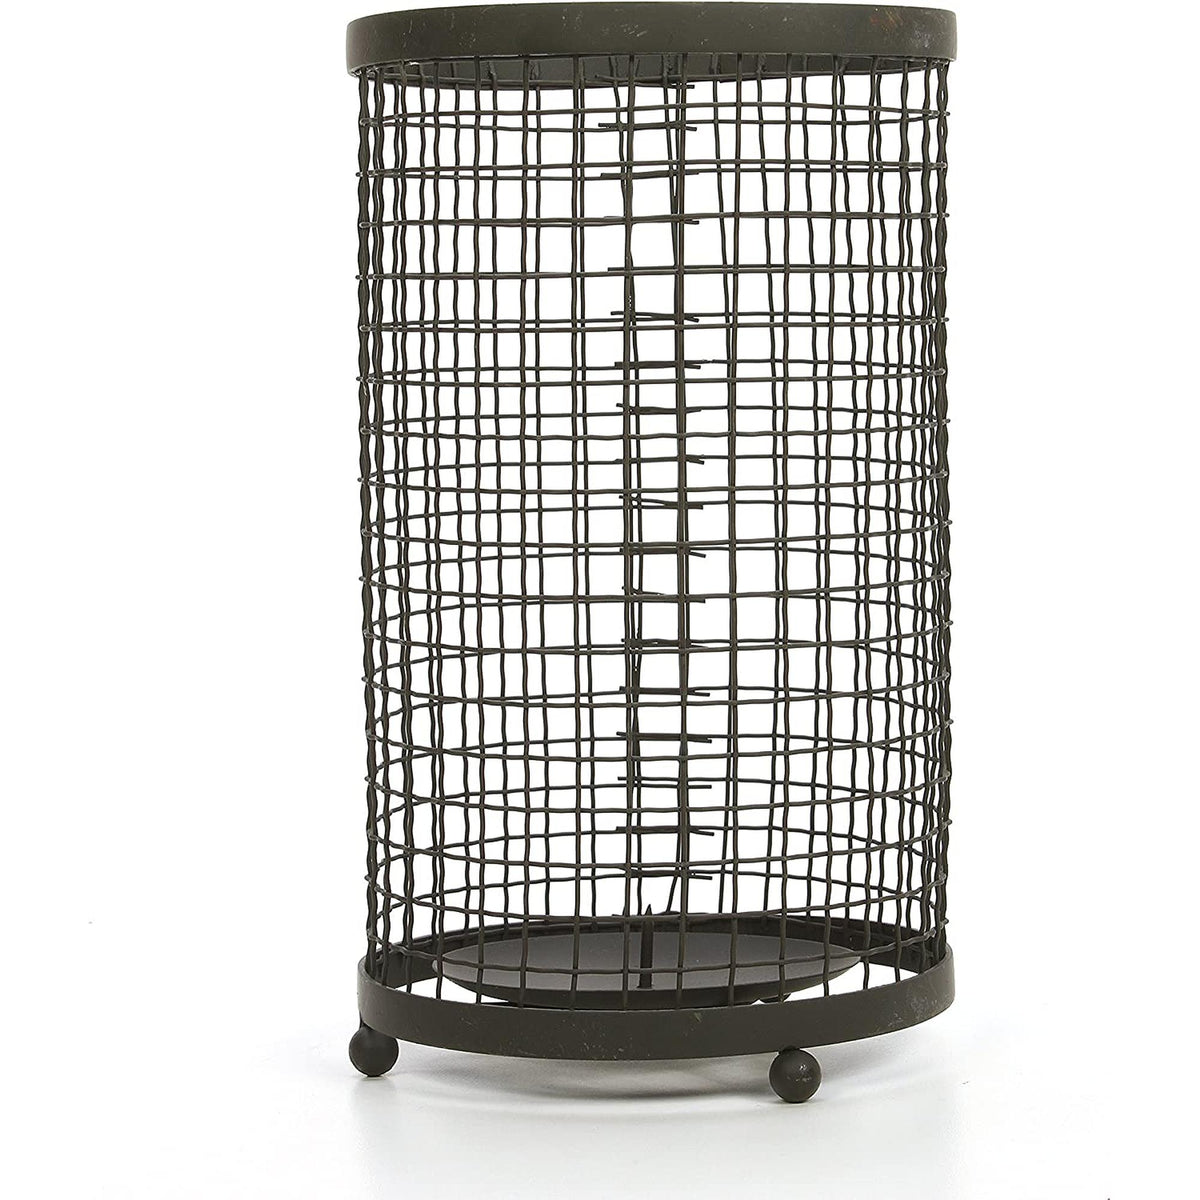 HOSLEY®  Iron Pillar Candle Holder/Sleeve, Black Color, 9.75 inches High